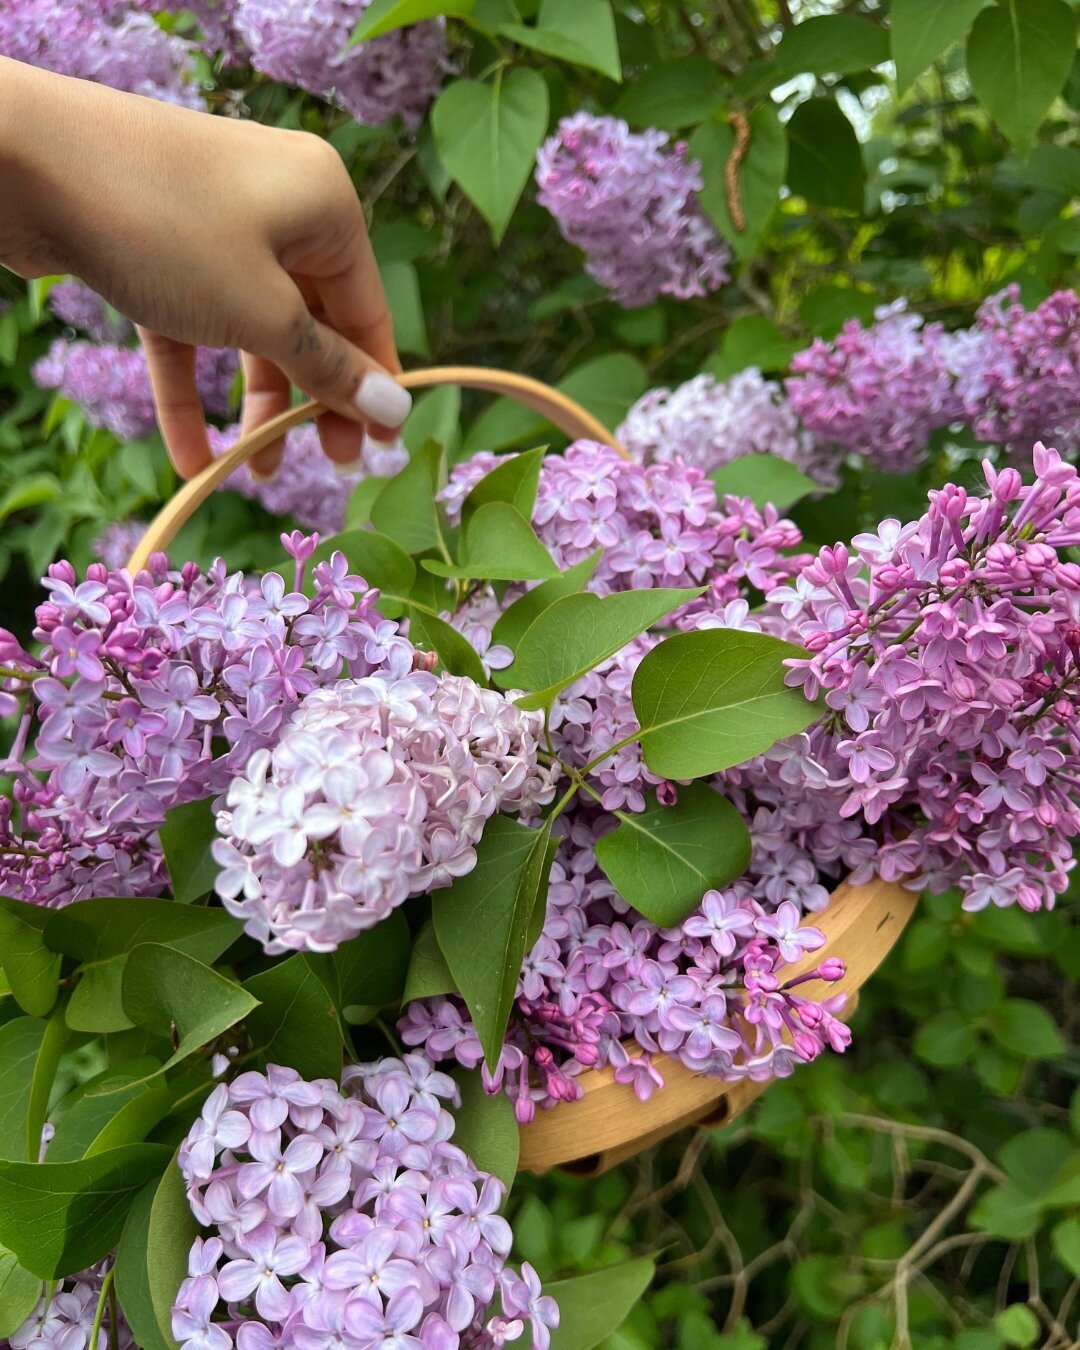 It's lilac season 🥰 Swipe for 3 ways to use lilacs in your cooking ➡️⁠
🟣 Lilac honey - great in baking or just to spread on scones or toast⁠
⁠
🟣 Lilac sugar - again a great one for baking, or use for a sugar rim for cocktails/mocktail glasses⁠
⁠
?